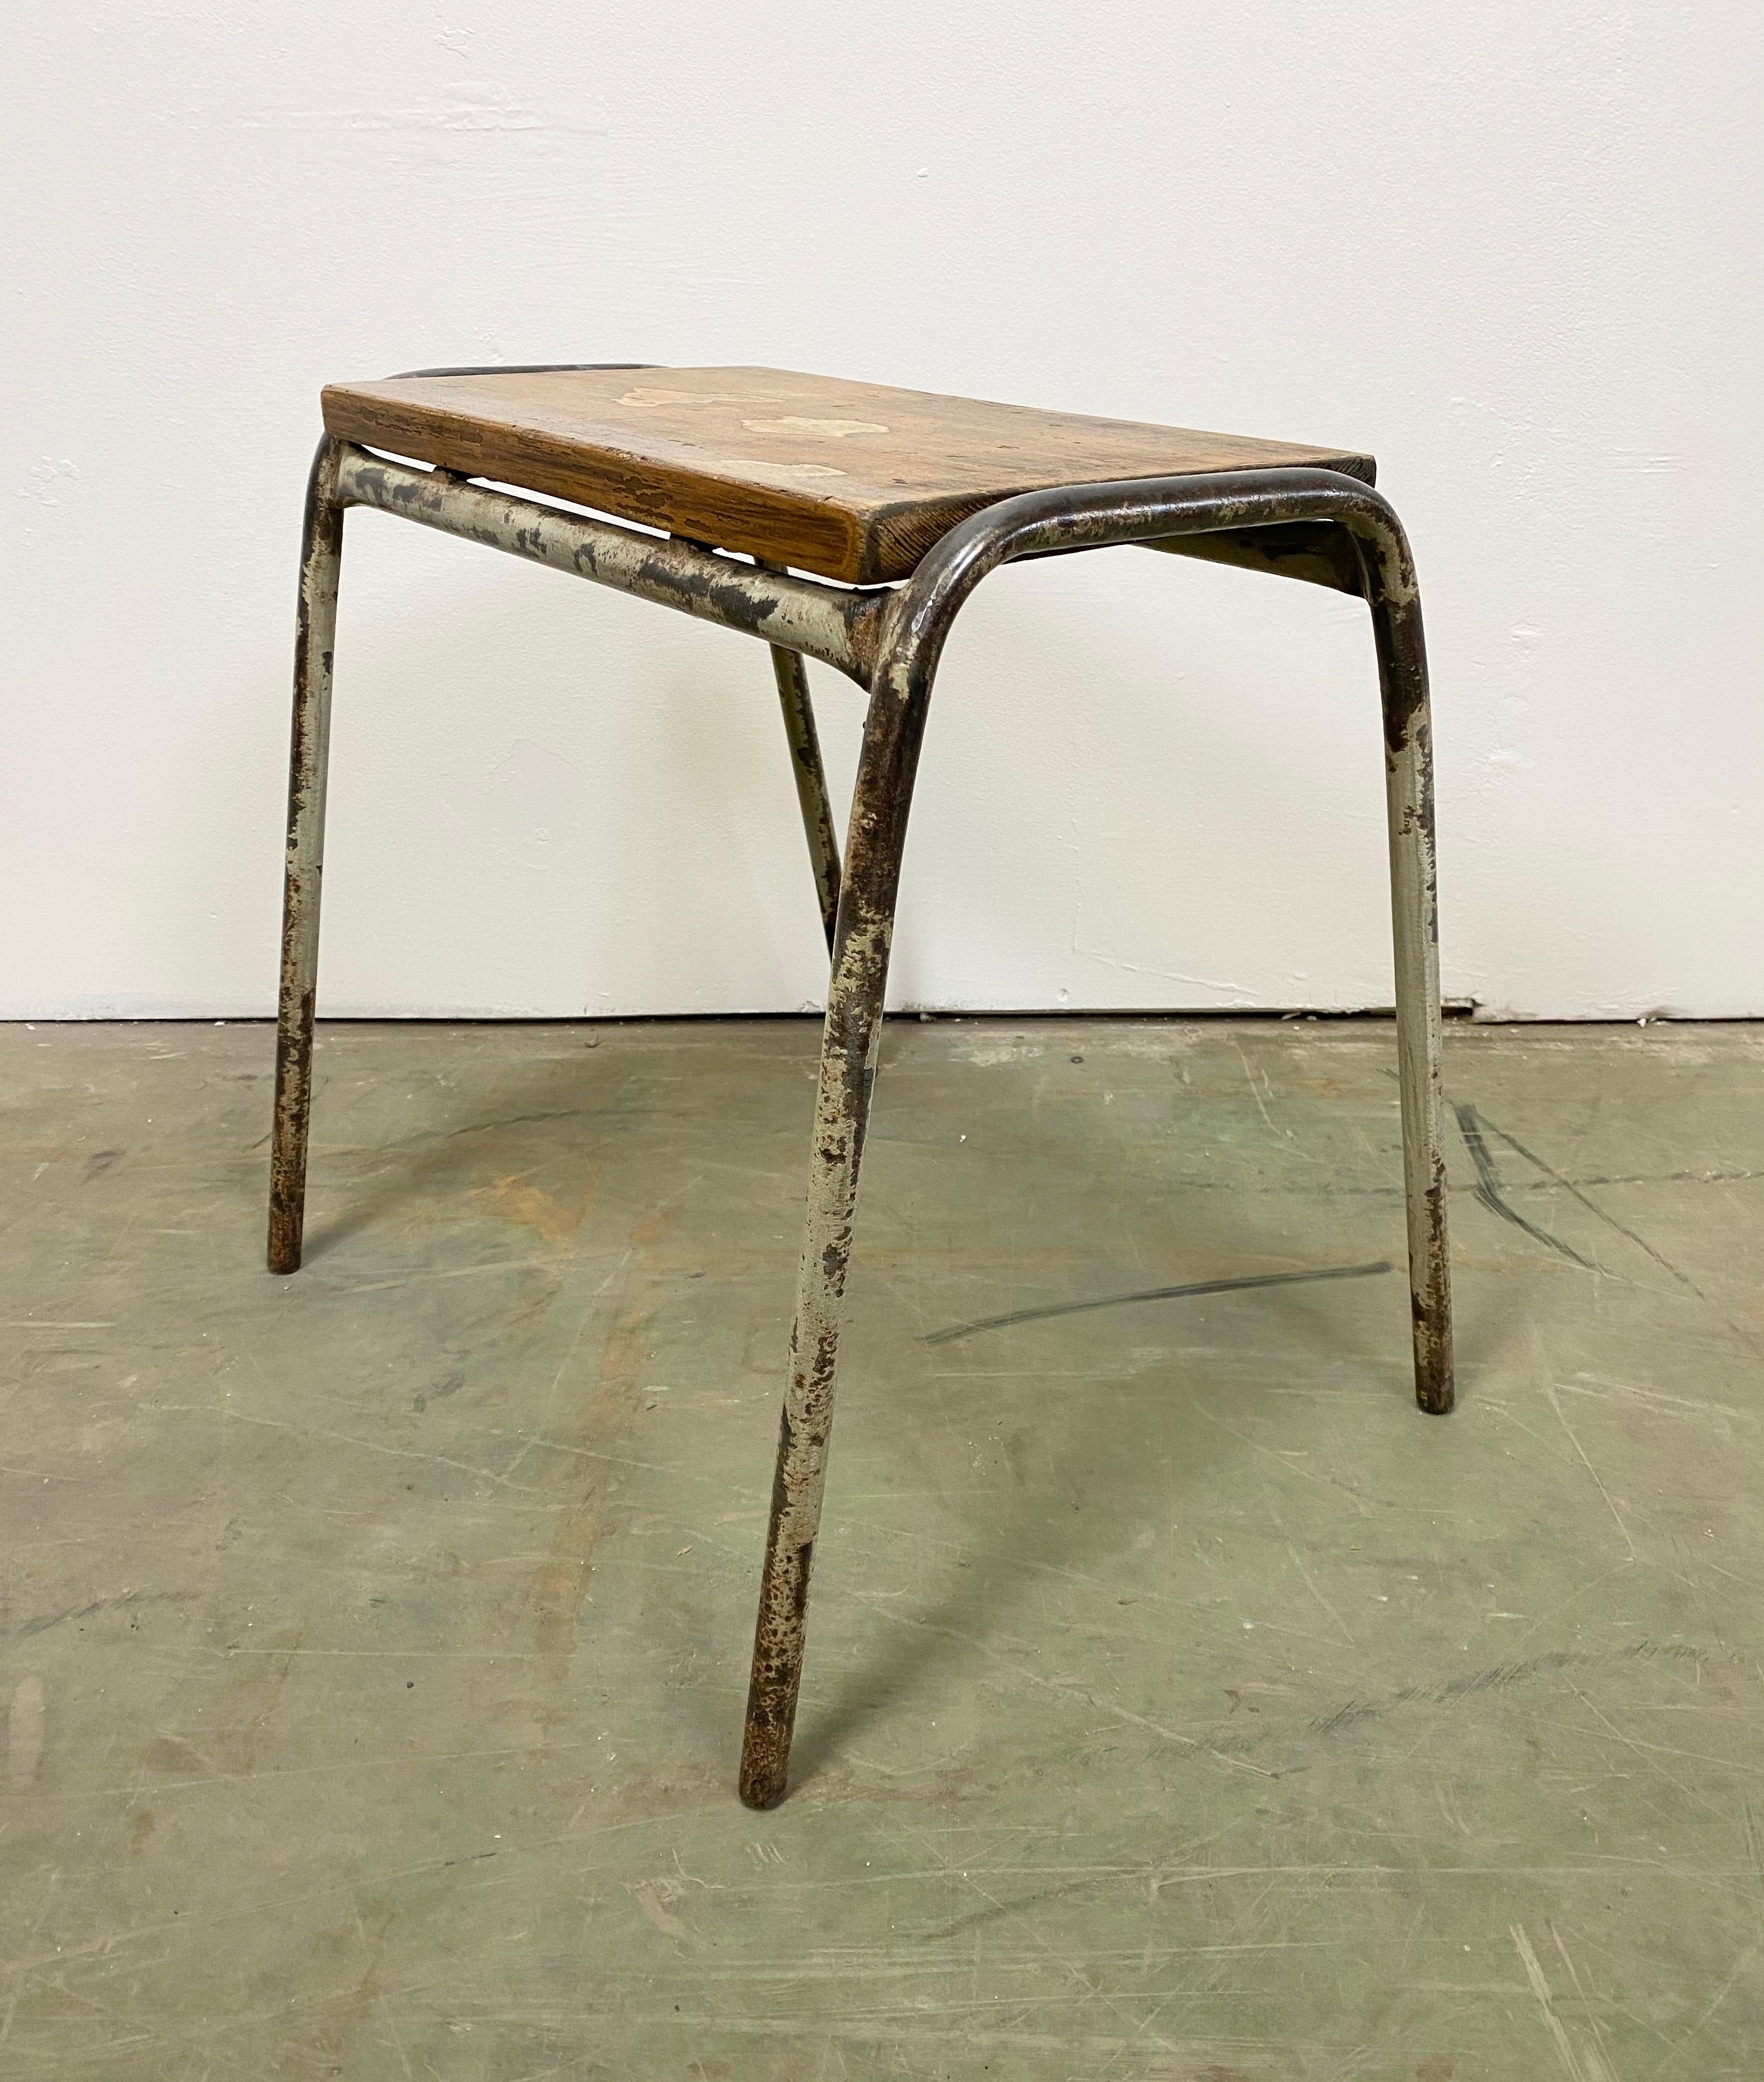 This industrial stool was made in the 1960s. It features an iron frame structure and a wooden seat. The stool has an age-related patina, it has been partly restored and remains in a good vintage condition with normal traces of use.
The weight of